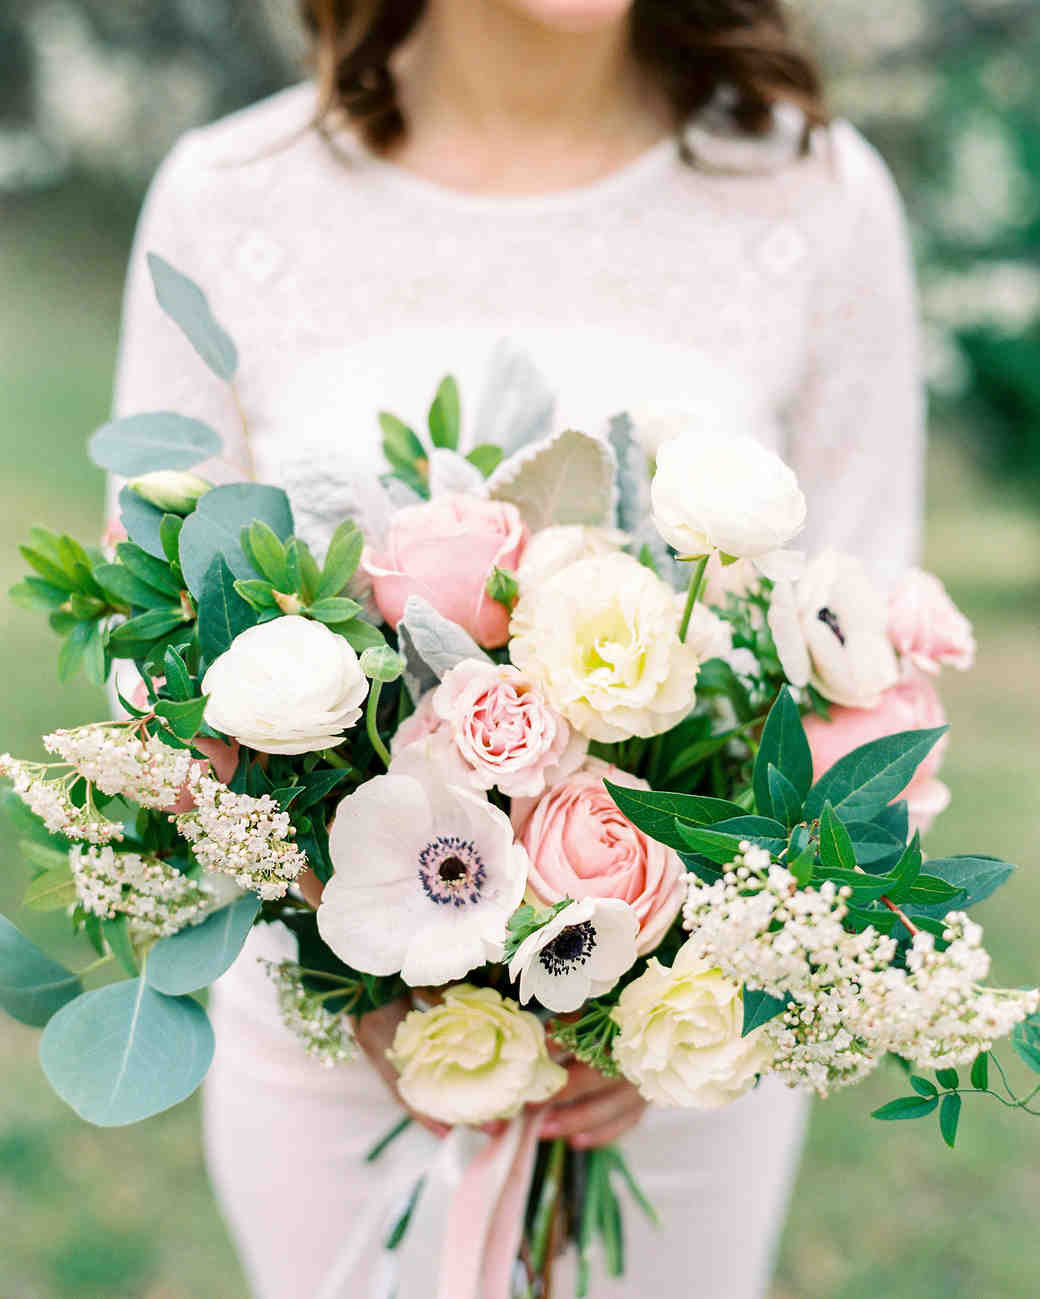 Spring Flowers For Weddings
 The 50 Best Spring Wedding Bouquets